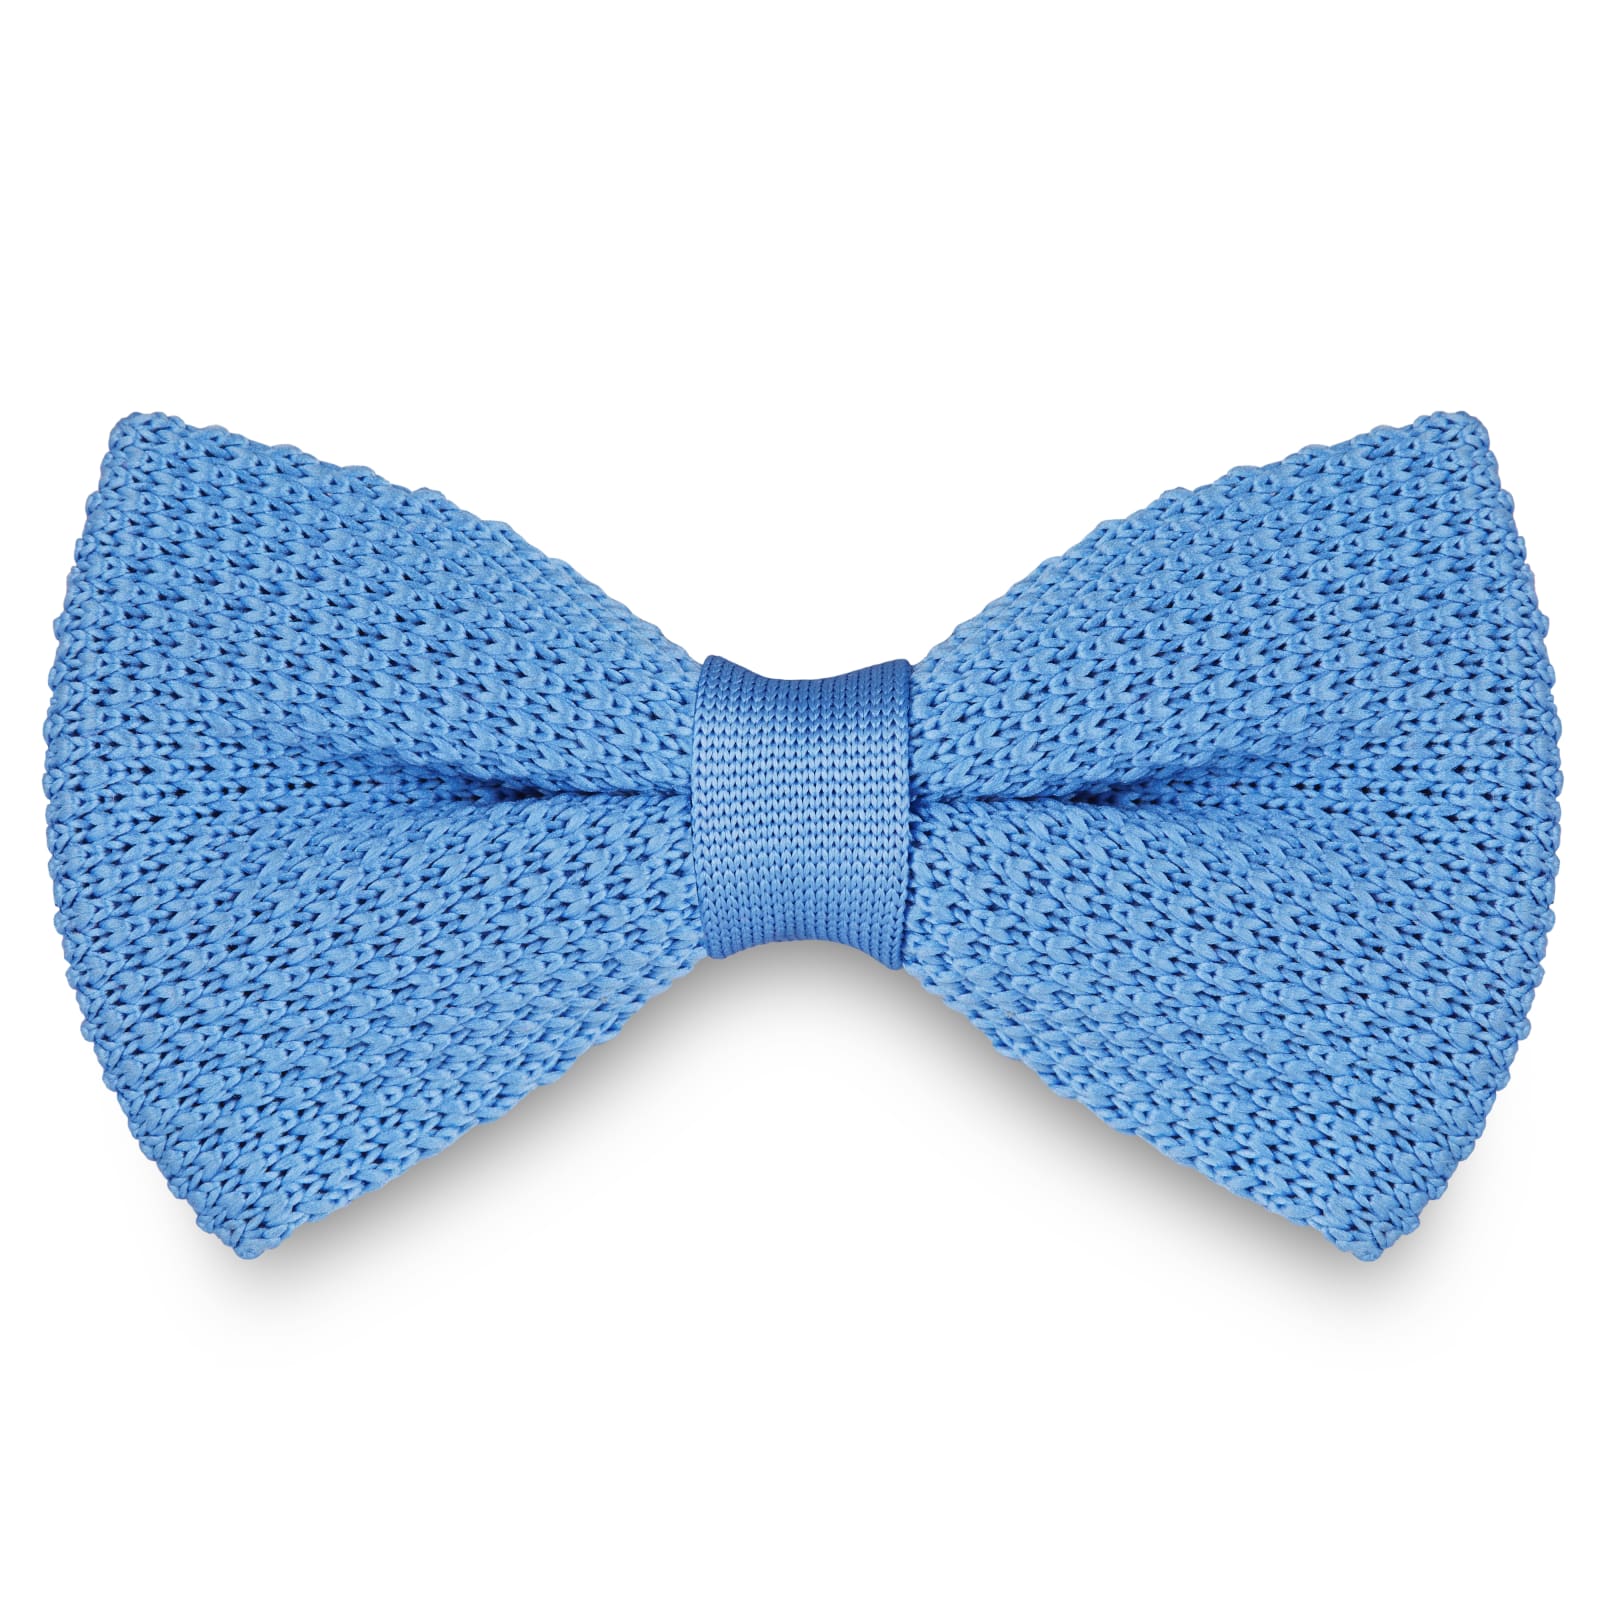 LIGHT BLUE KNITTED BOW TIES